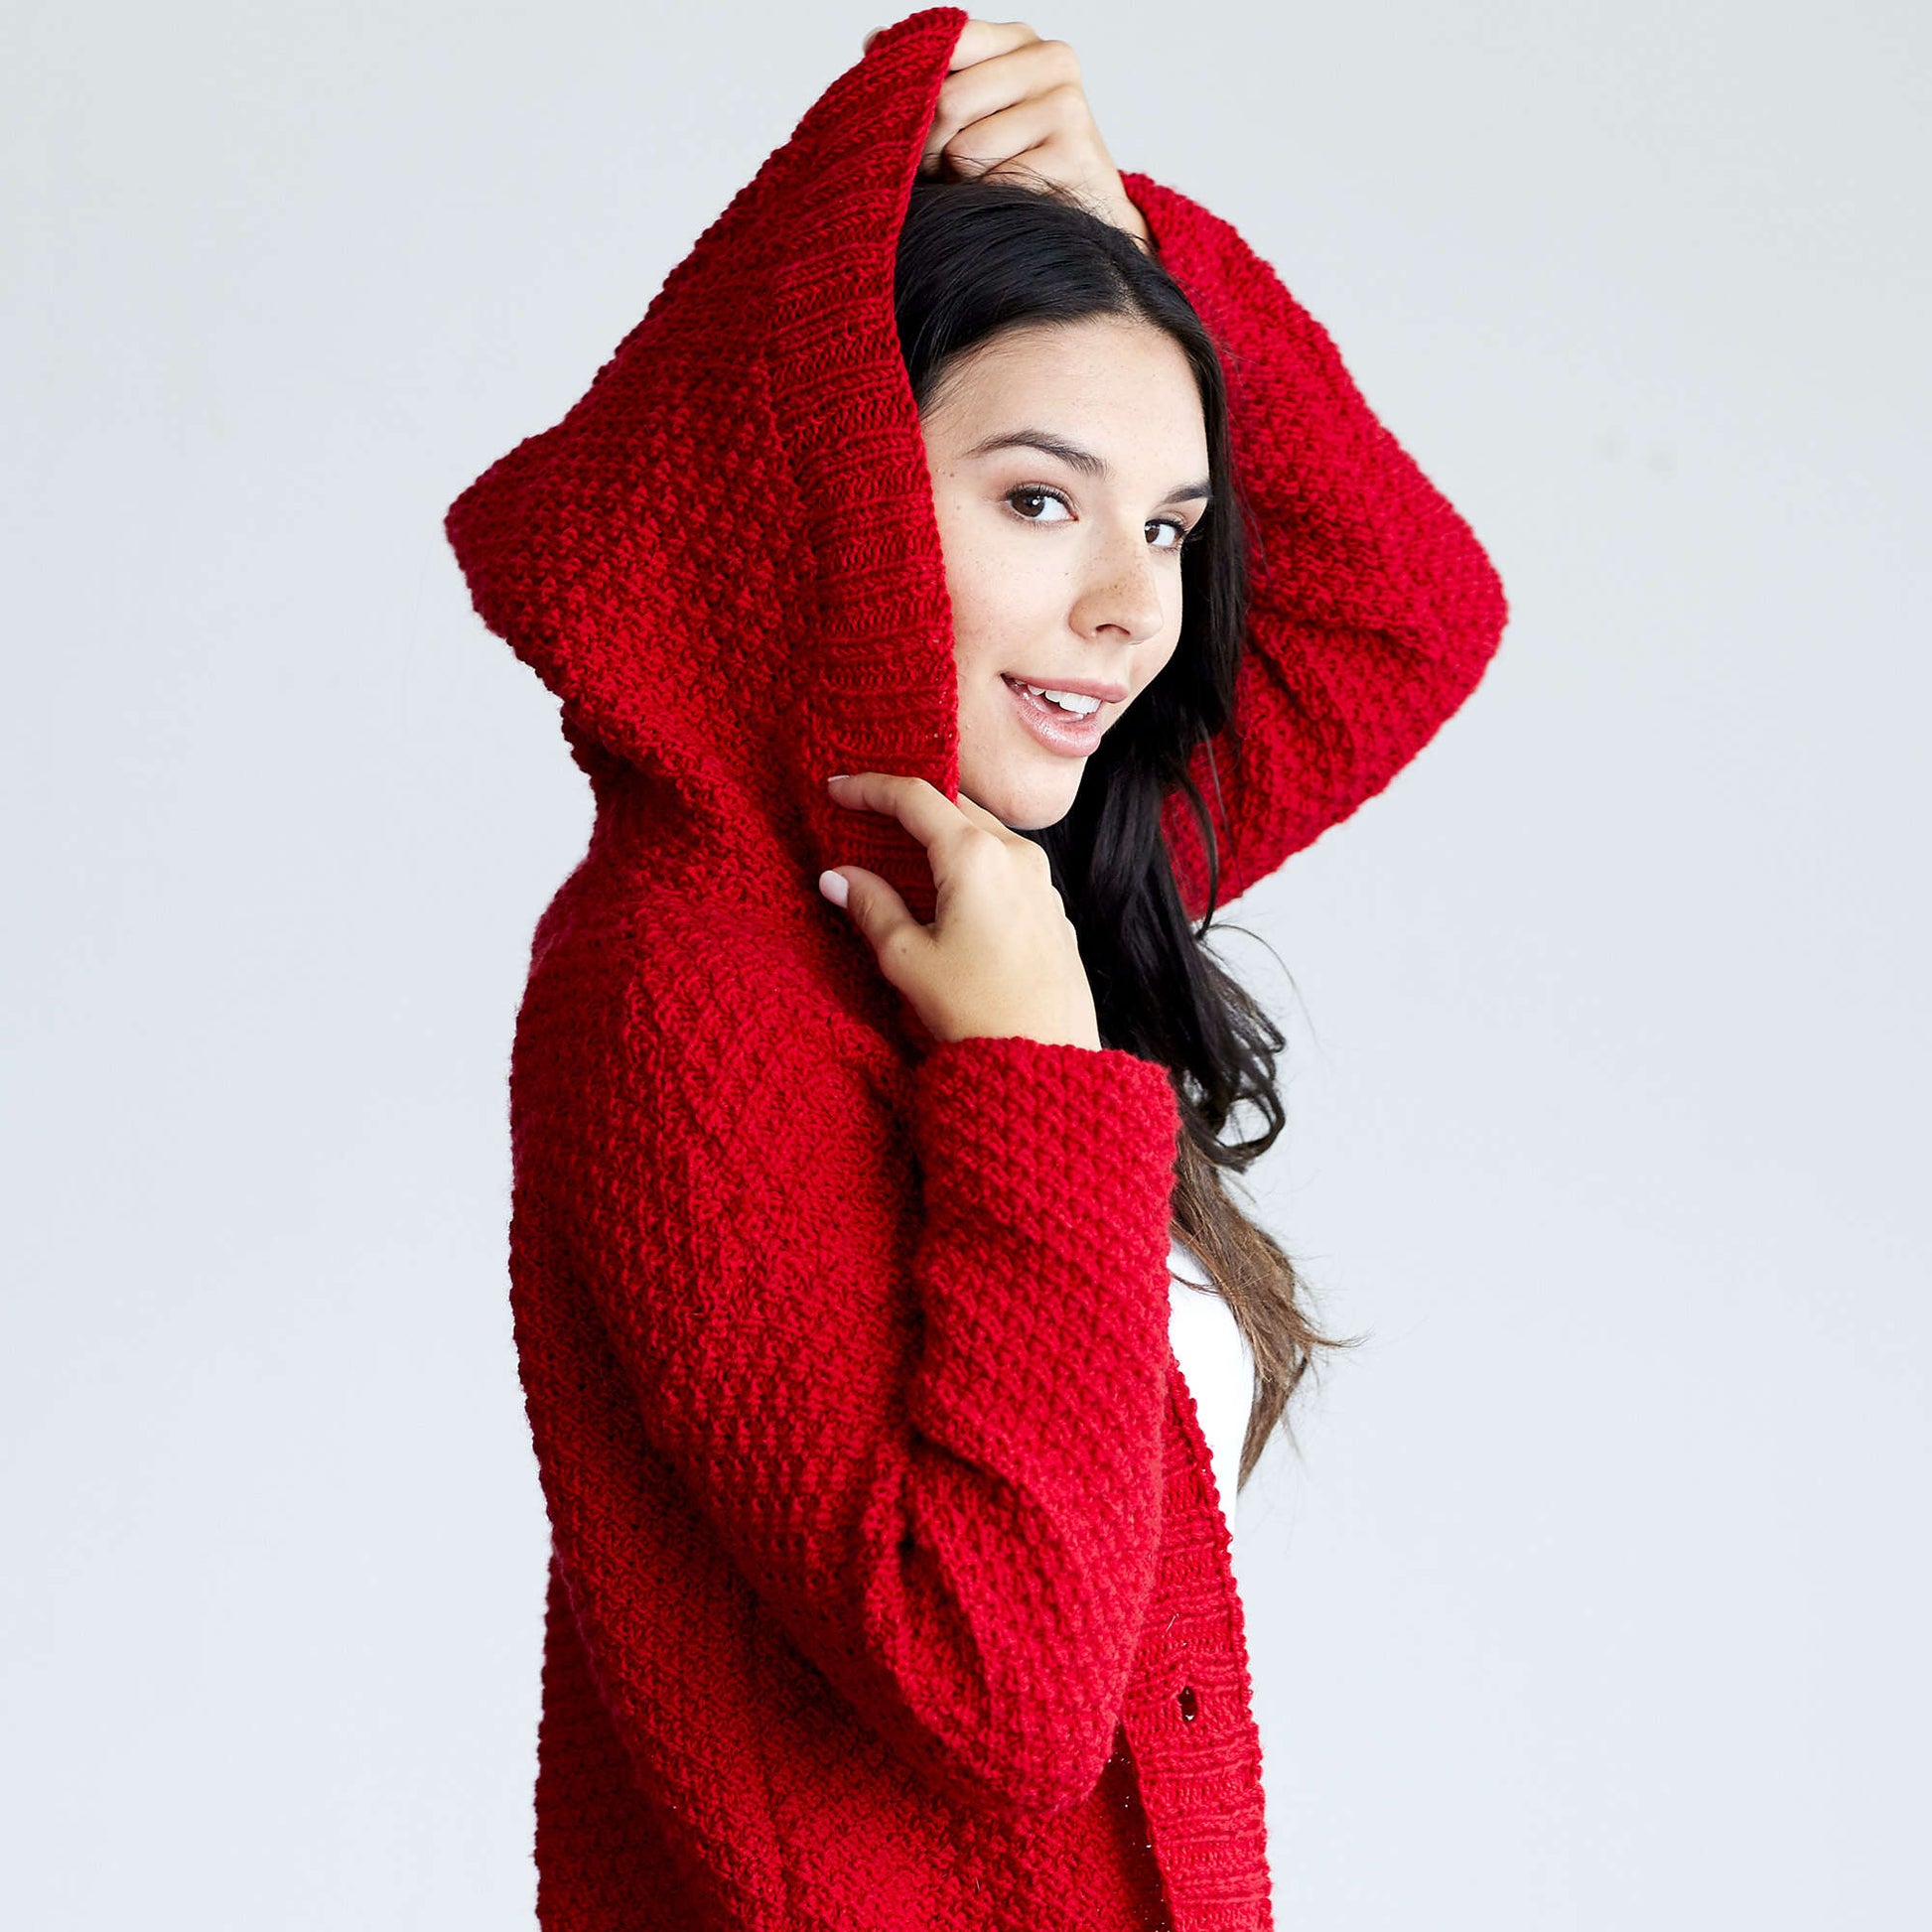 Free Red Heart Lazy Day Chic Sweater Knit Pattern